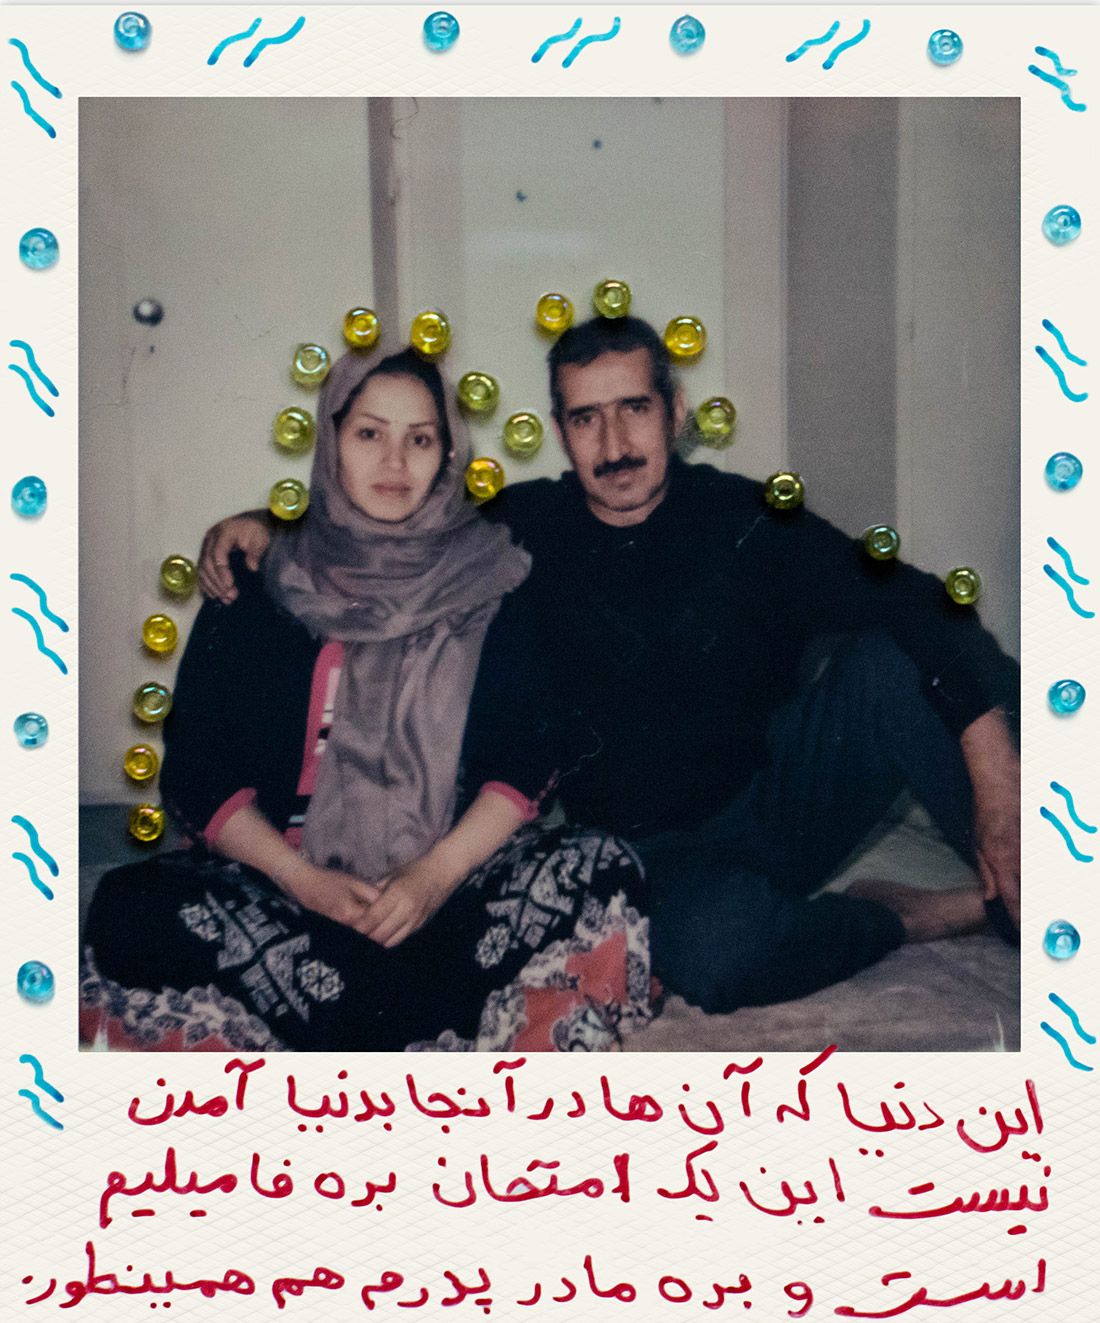 Milad’s parents, Aziza and Mohammed. “I sometimes worry about them,” said Milad, who took this photo with a Polaroid camera Markosian gave the family. Mohammed wants to be a chef, and Aziza wants to be a nurse, Markosian said. Photo by Milad Akhabyar. Germany, 2017. 